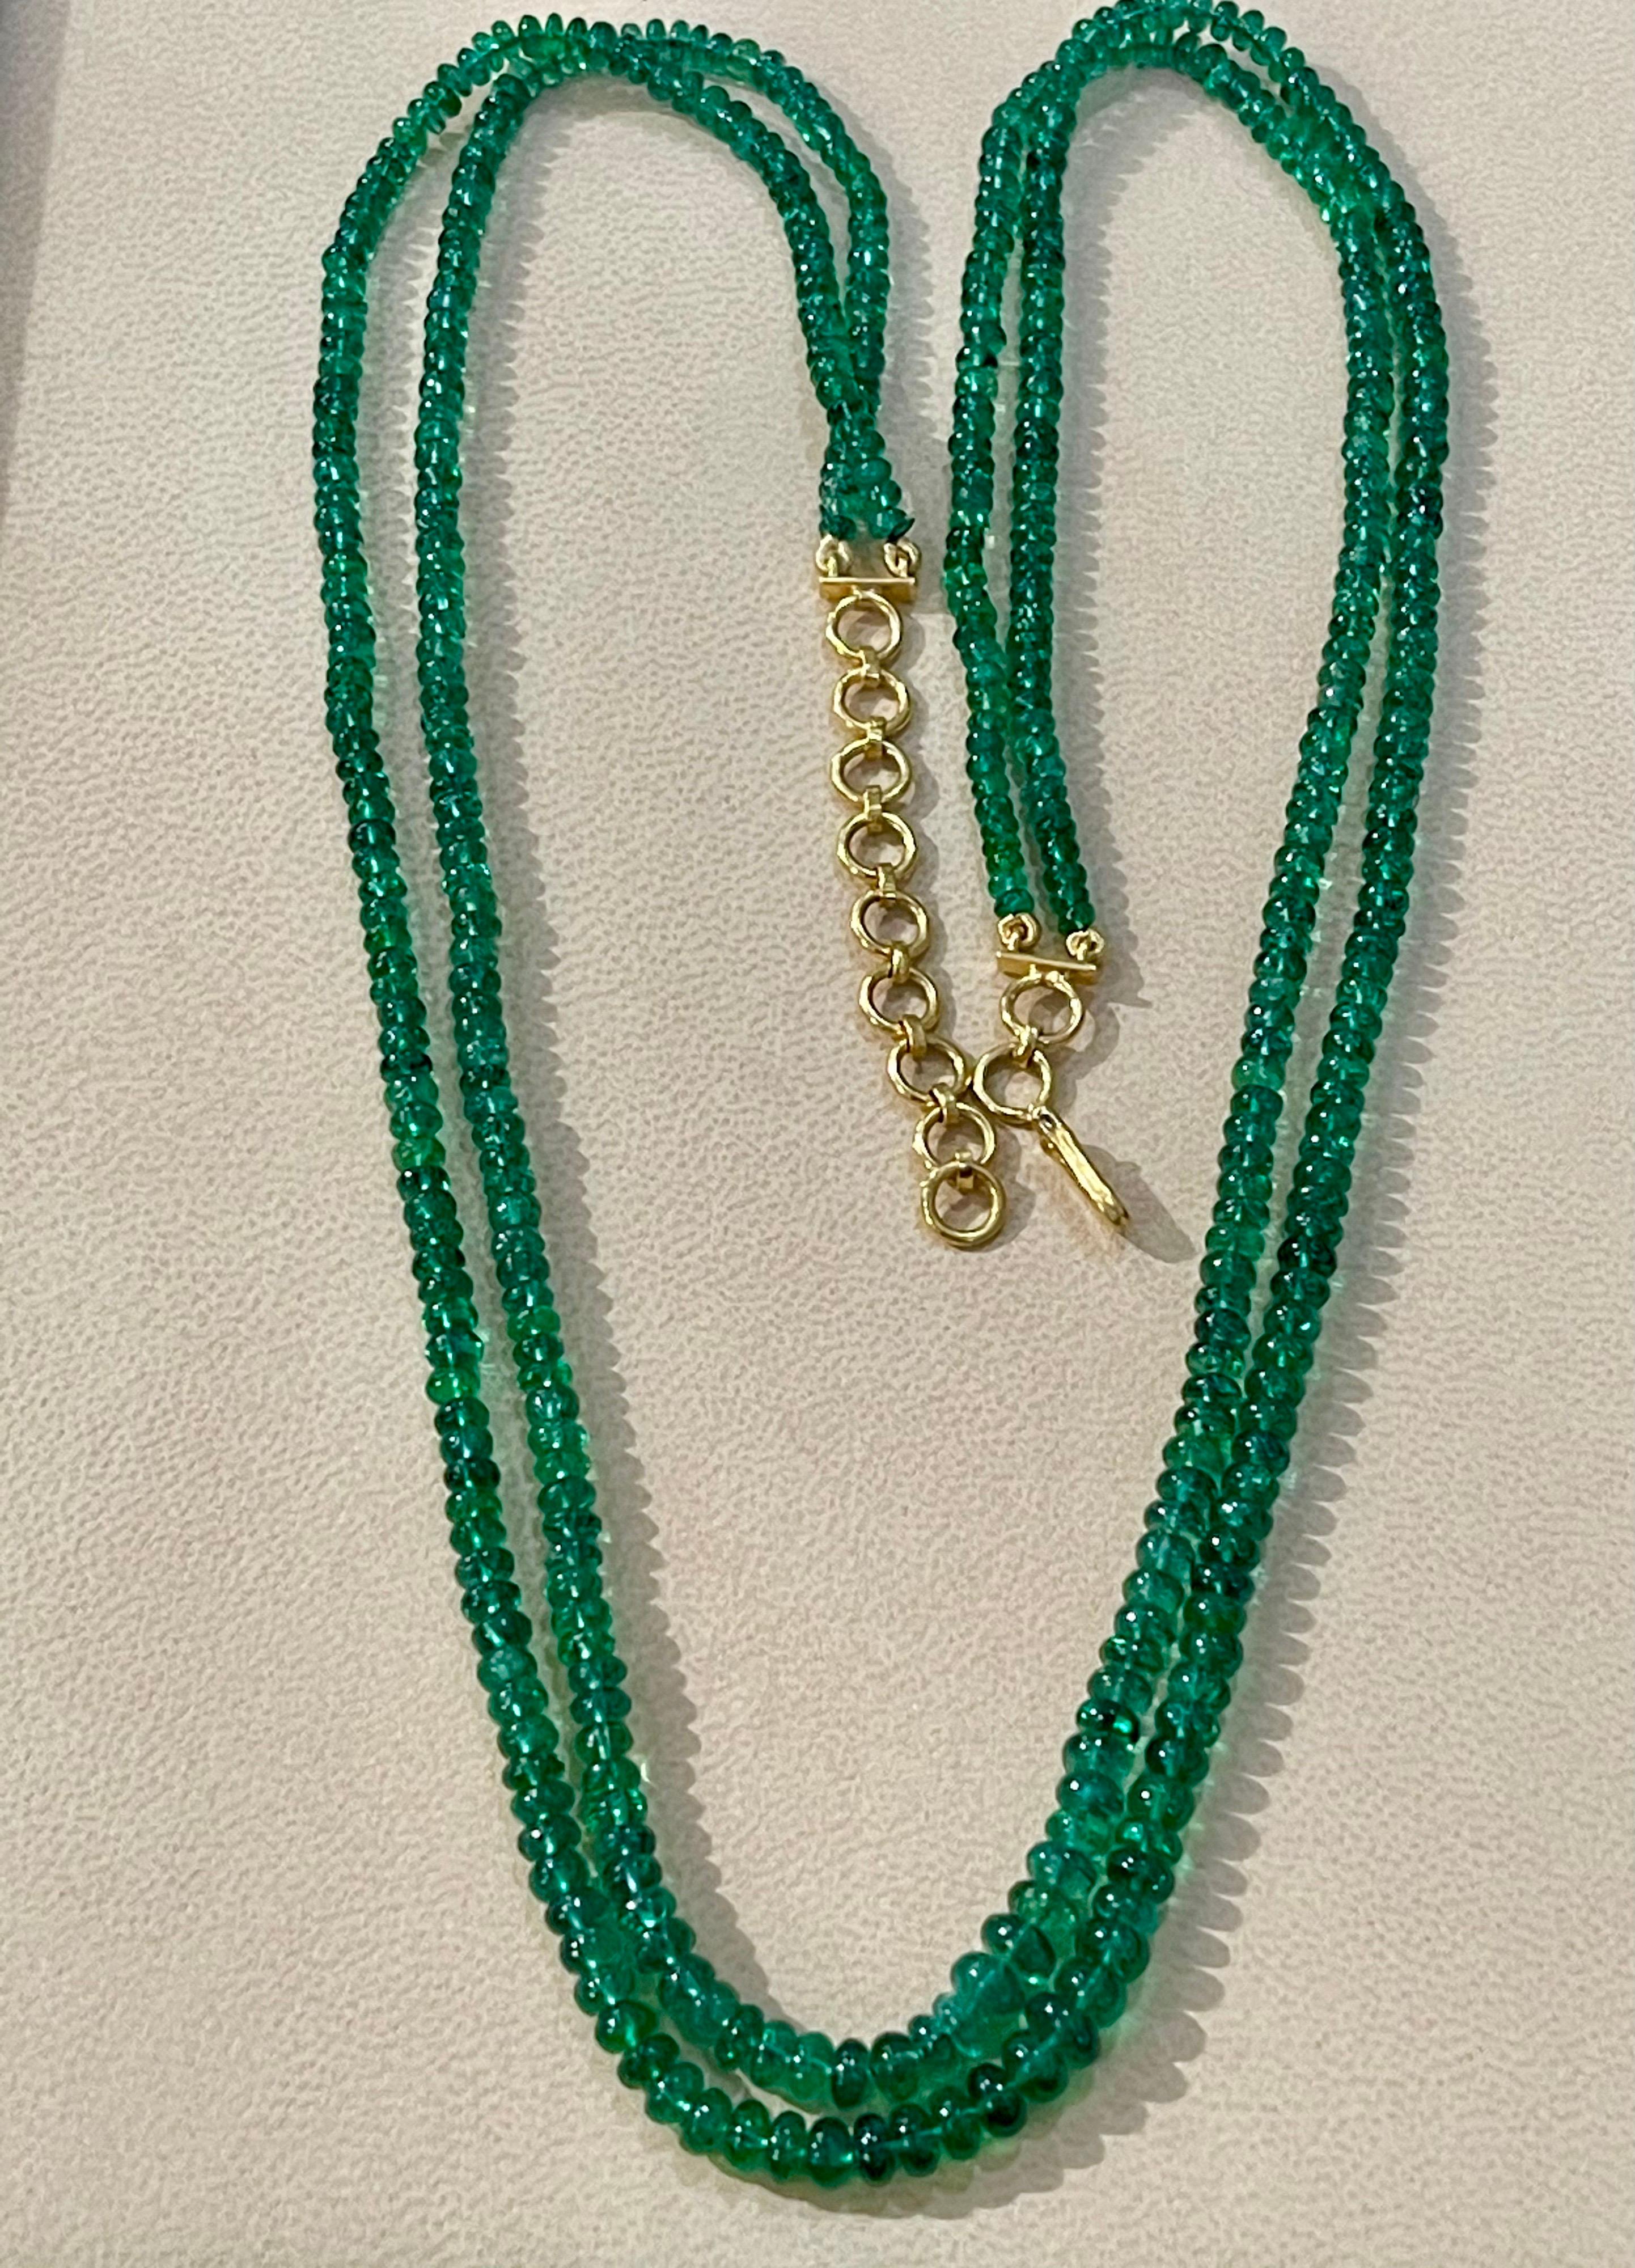 125ct Fine Emerald Beads 2 Line Necklace with 14 Kt Yellow Gold Clasp Adjustable 3